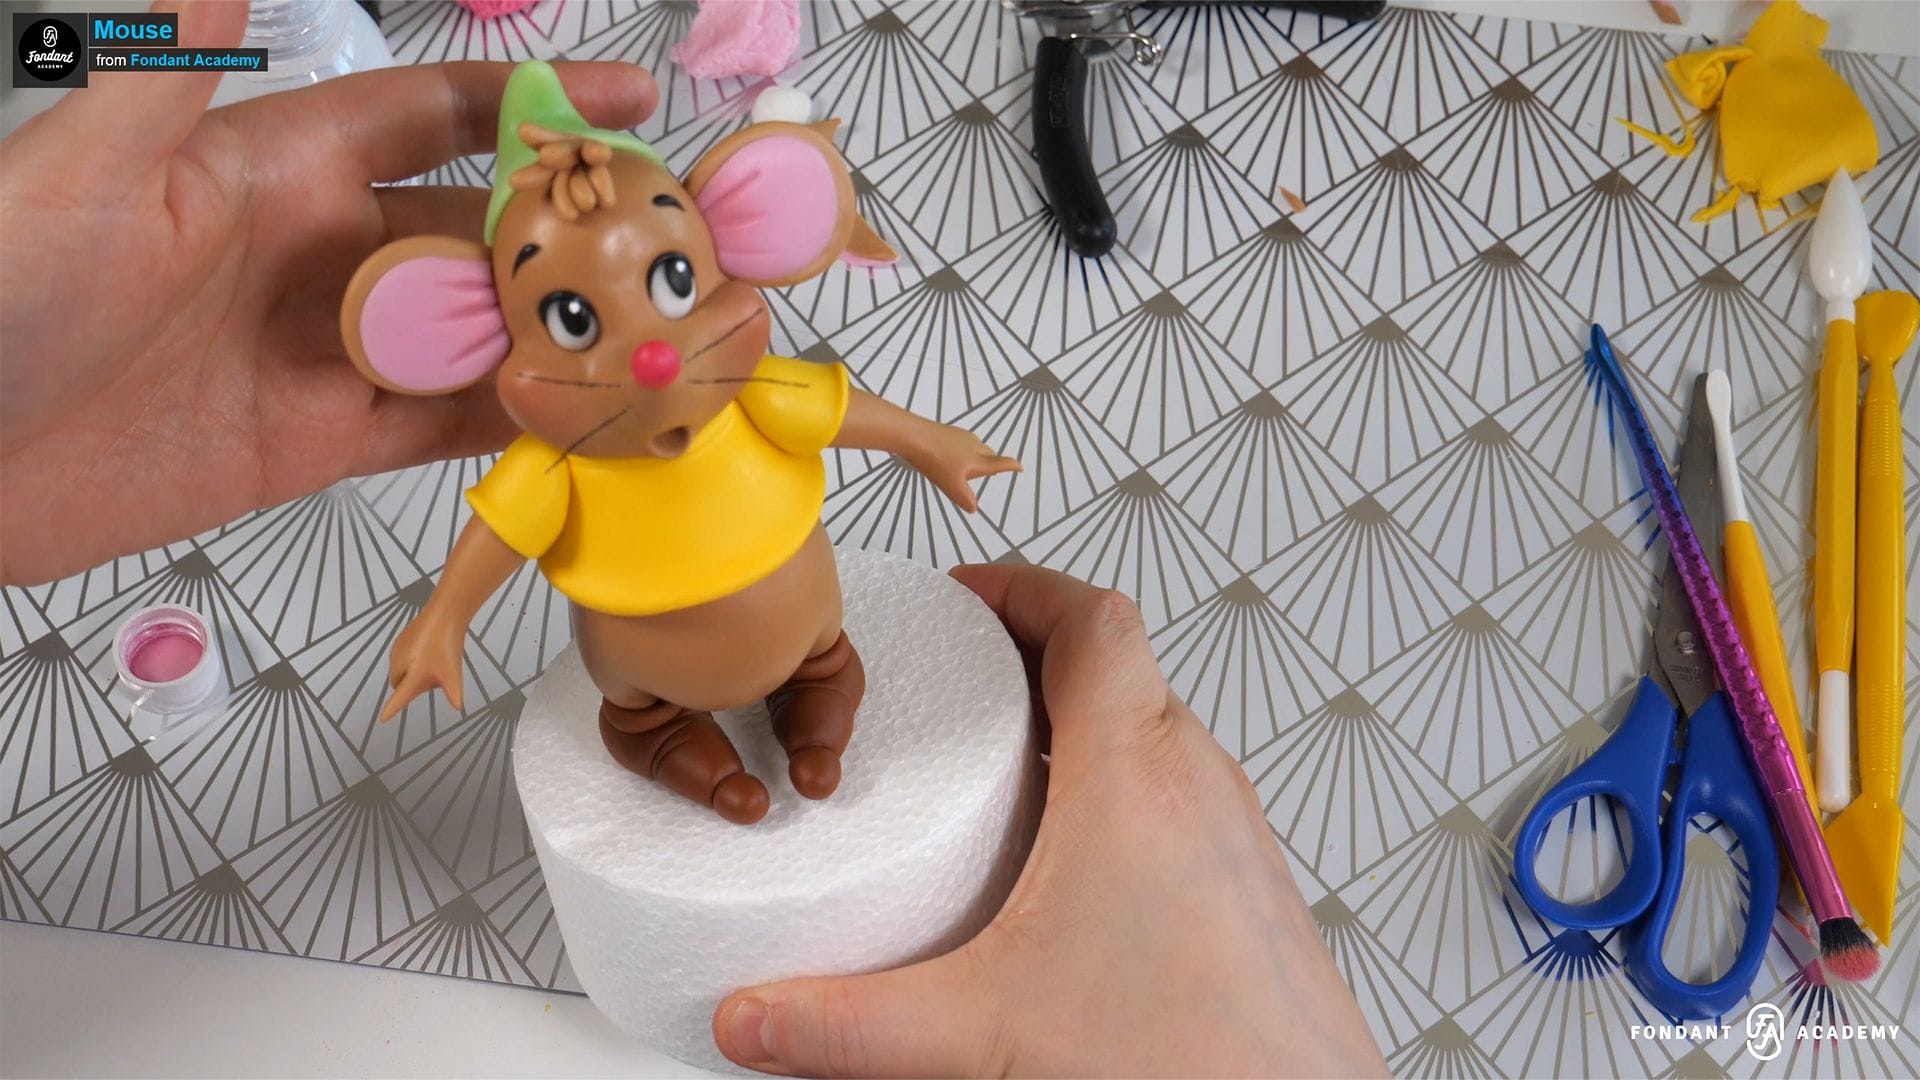 Gus mouse from Cinderella – Fondant Cake Topper Tutorial 5